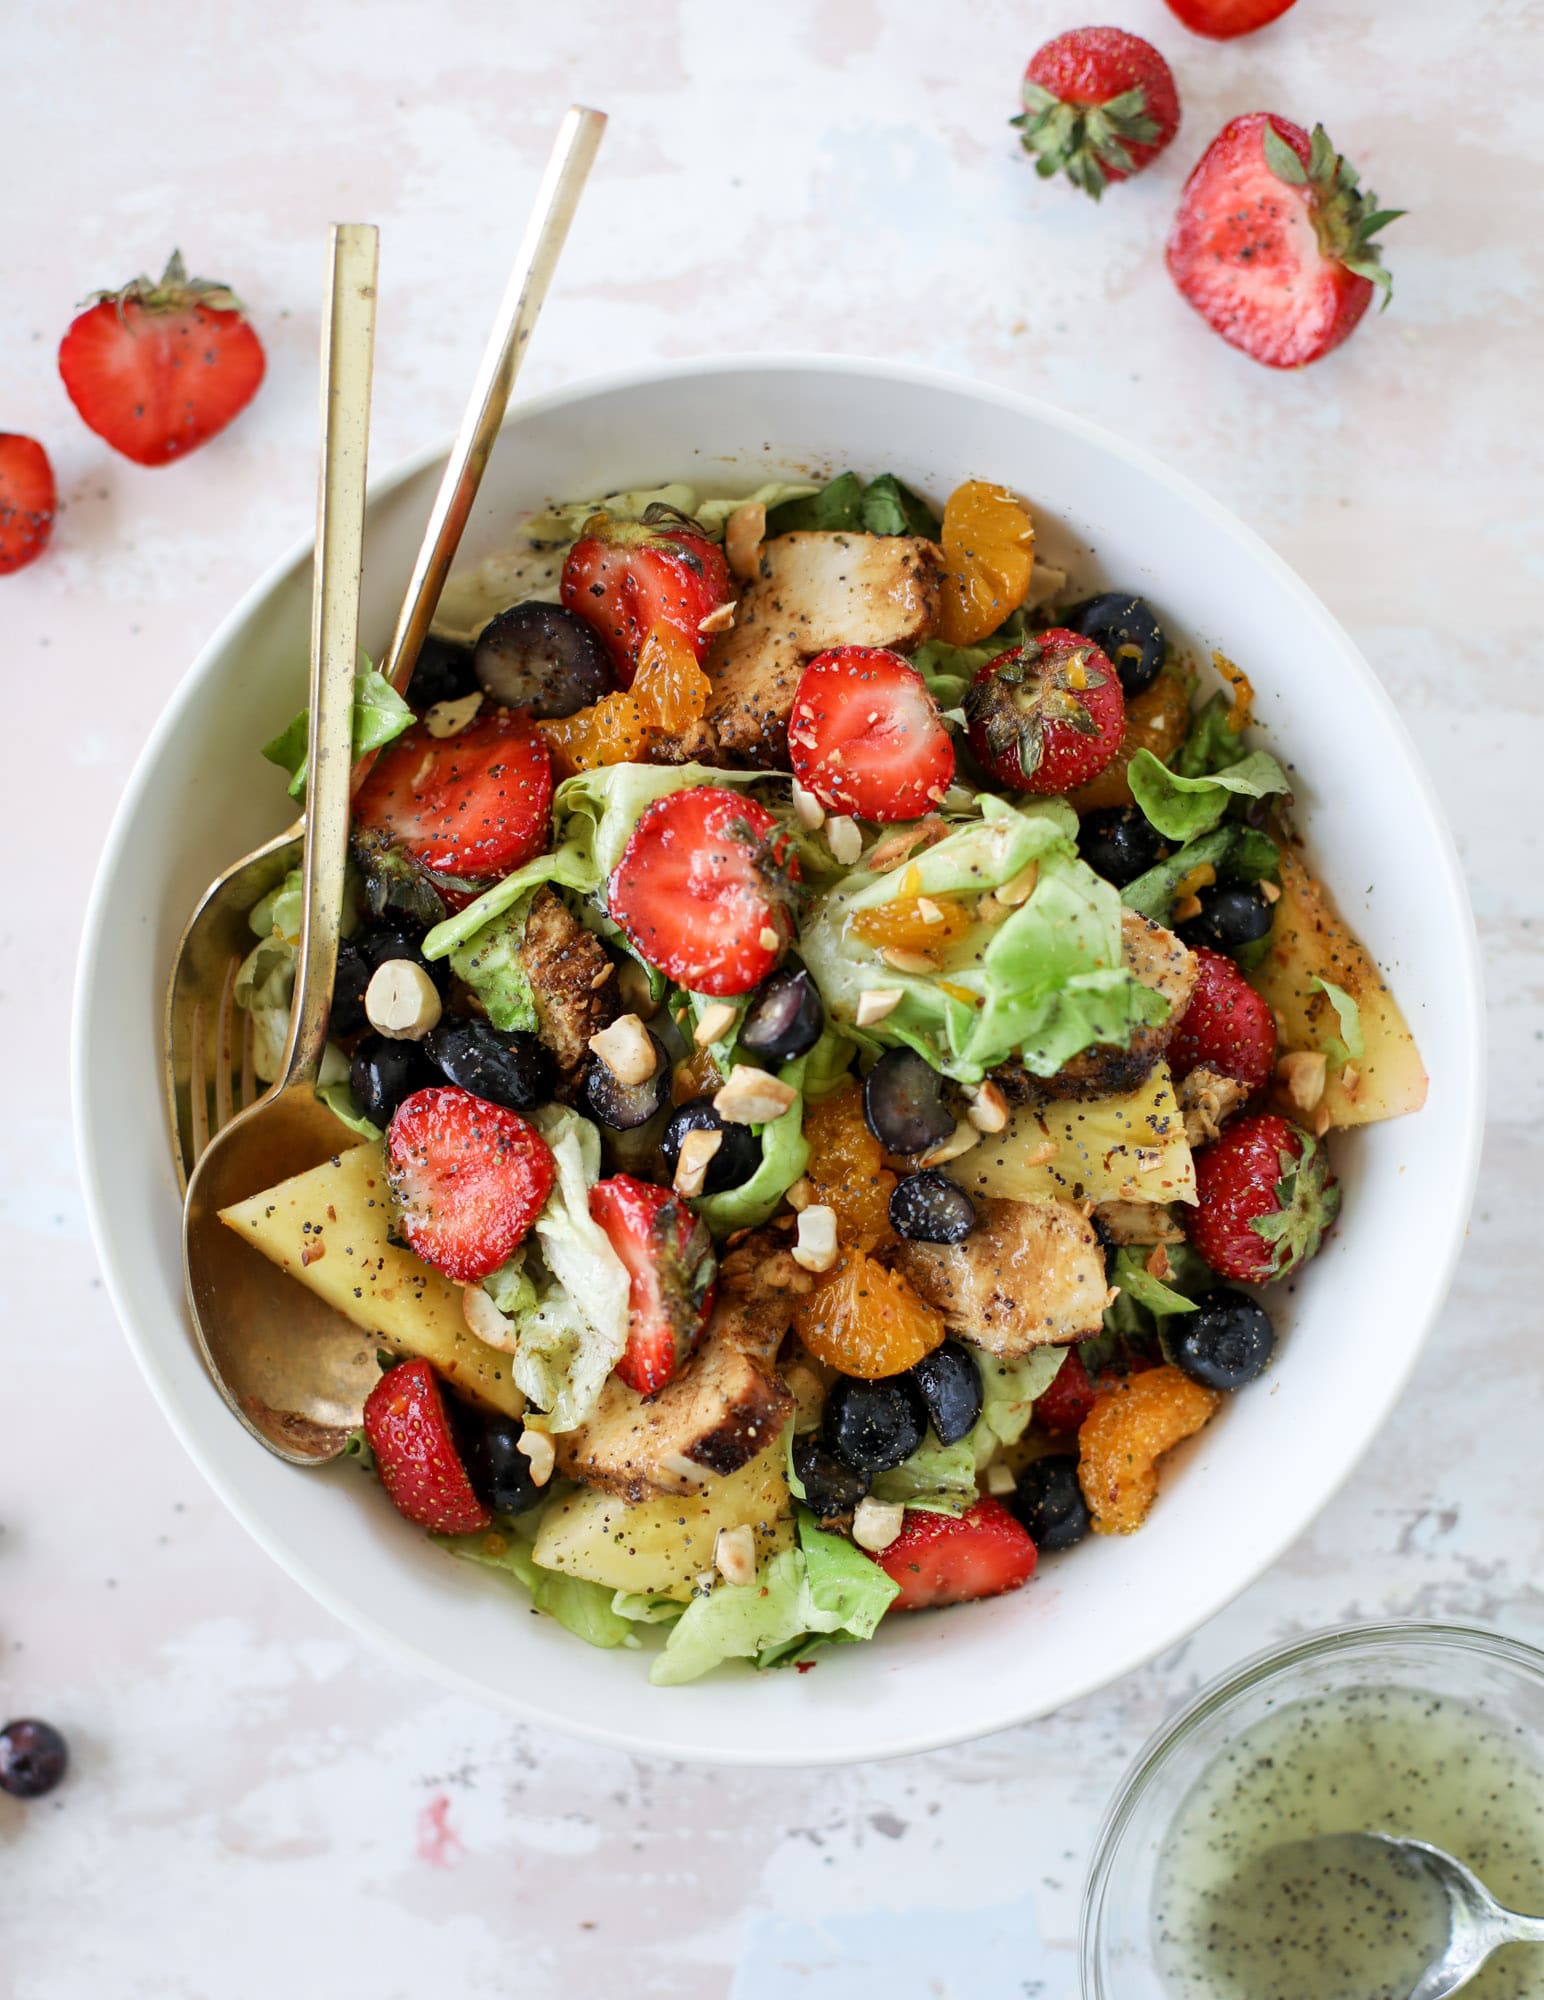 This copycat Panera strawberry poppyseed salad is absolutely delicious and refreshing and perfect for summer! Serve it with grilled chicken like the recipe here or swap for shrimp or fish. I howsweeteats.com #strawberry #poppyseed #salad #chicken #panera #copycat